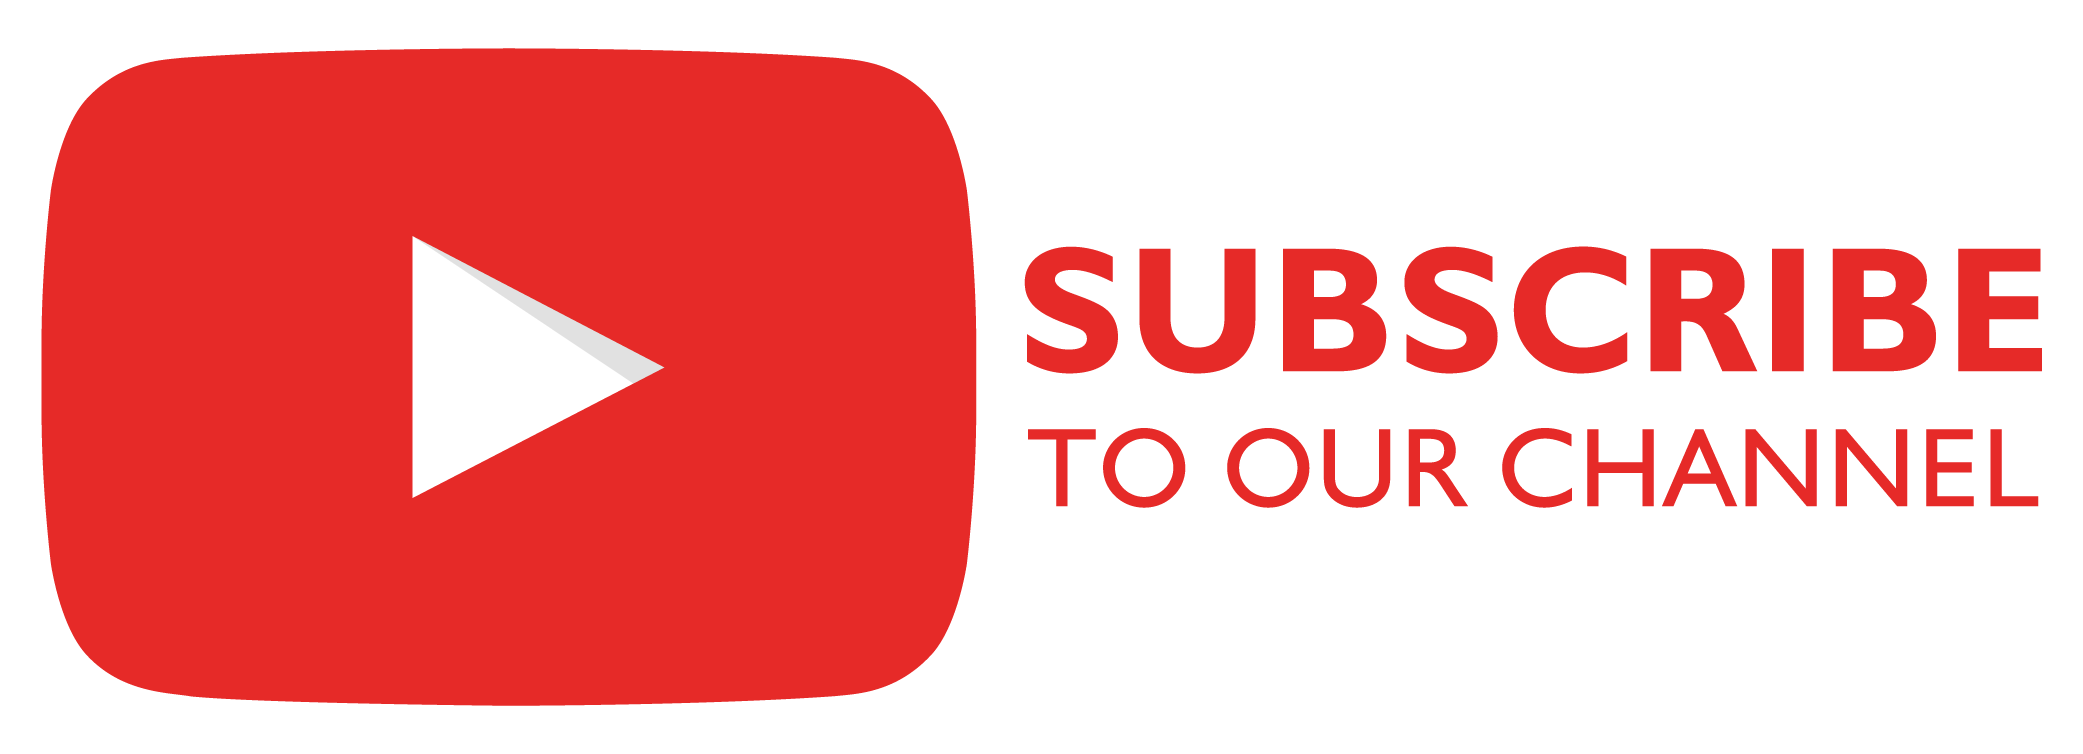 subscribe our channel youtube transparent png #27832